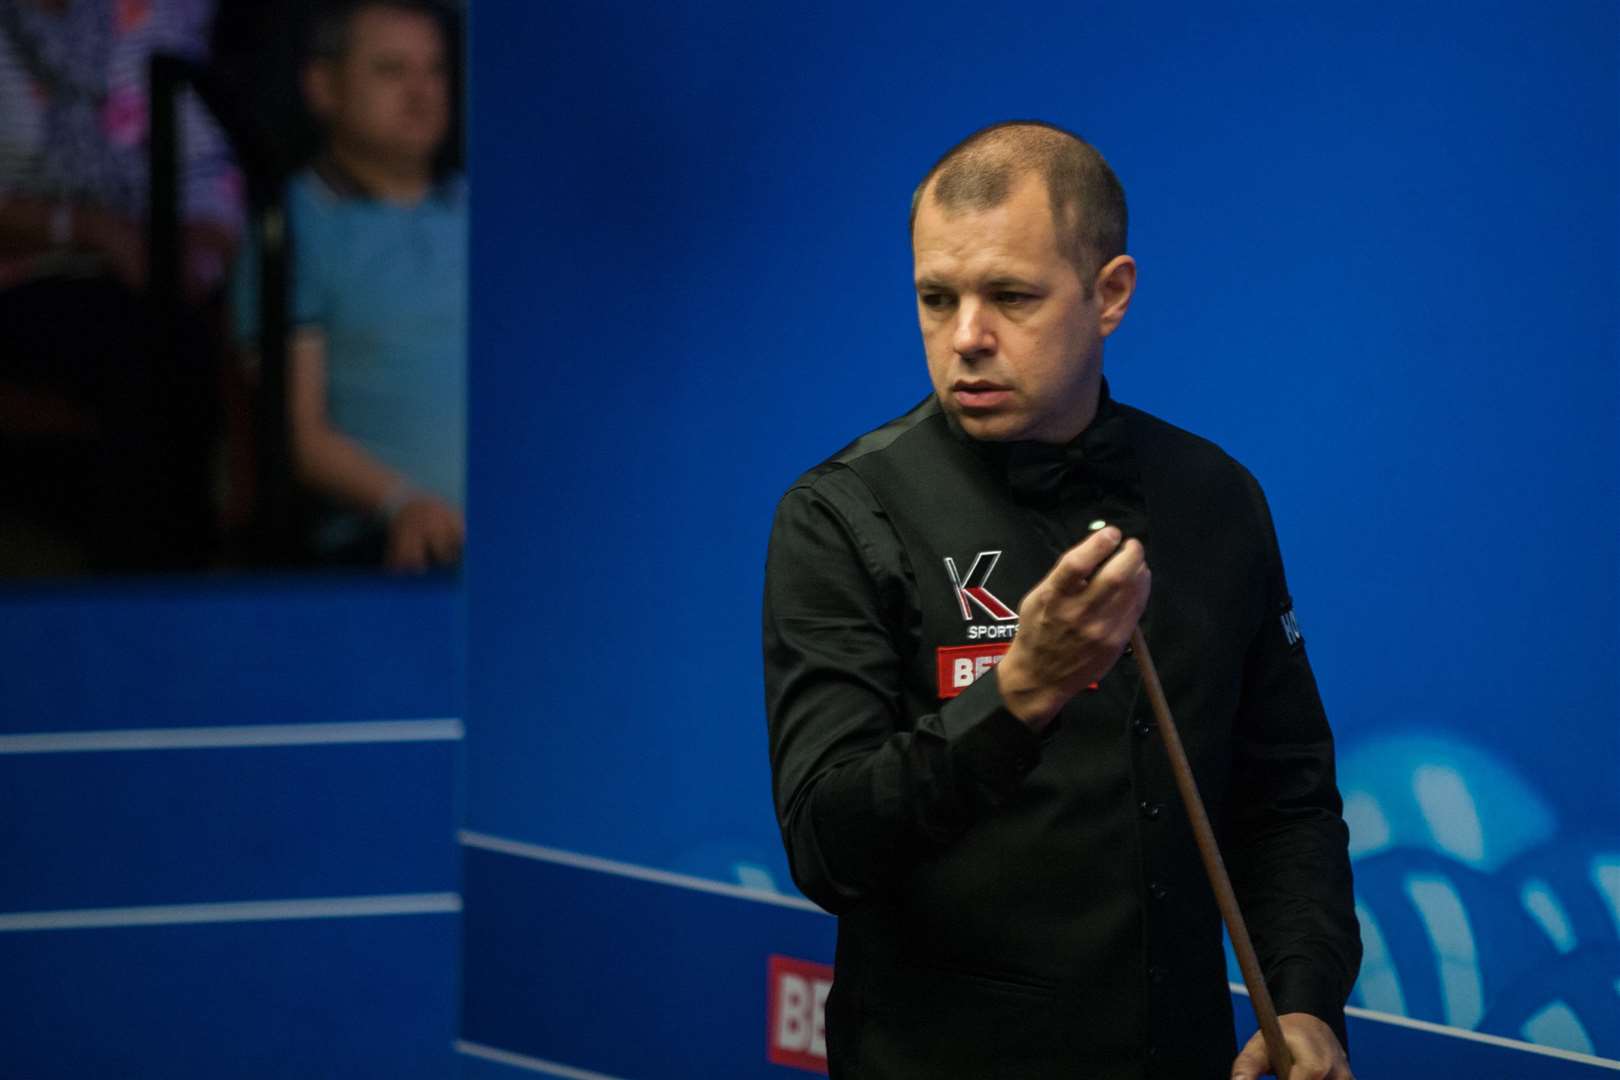 Barry Hawkins at the World Championship